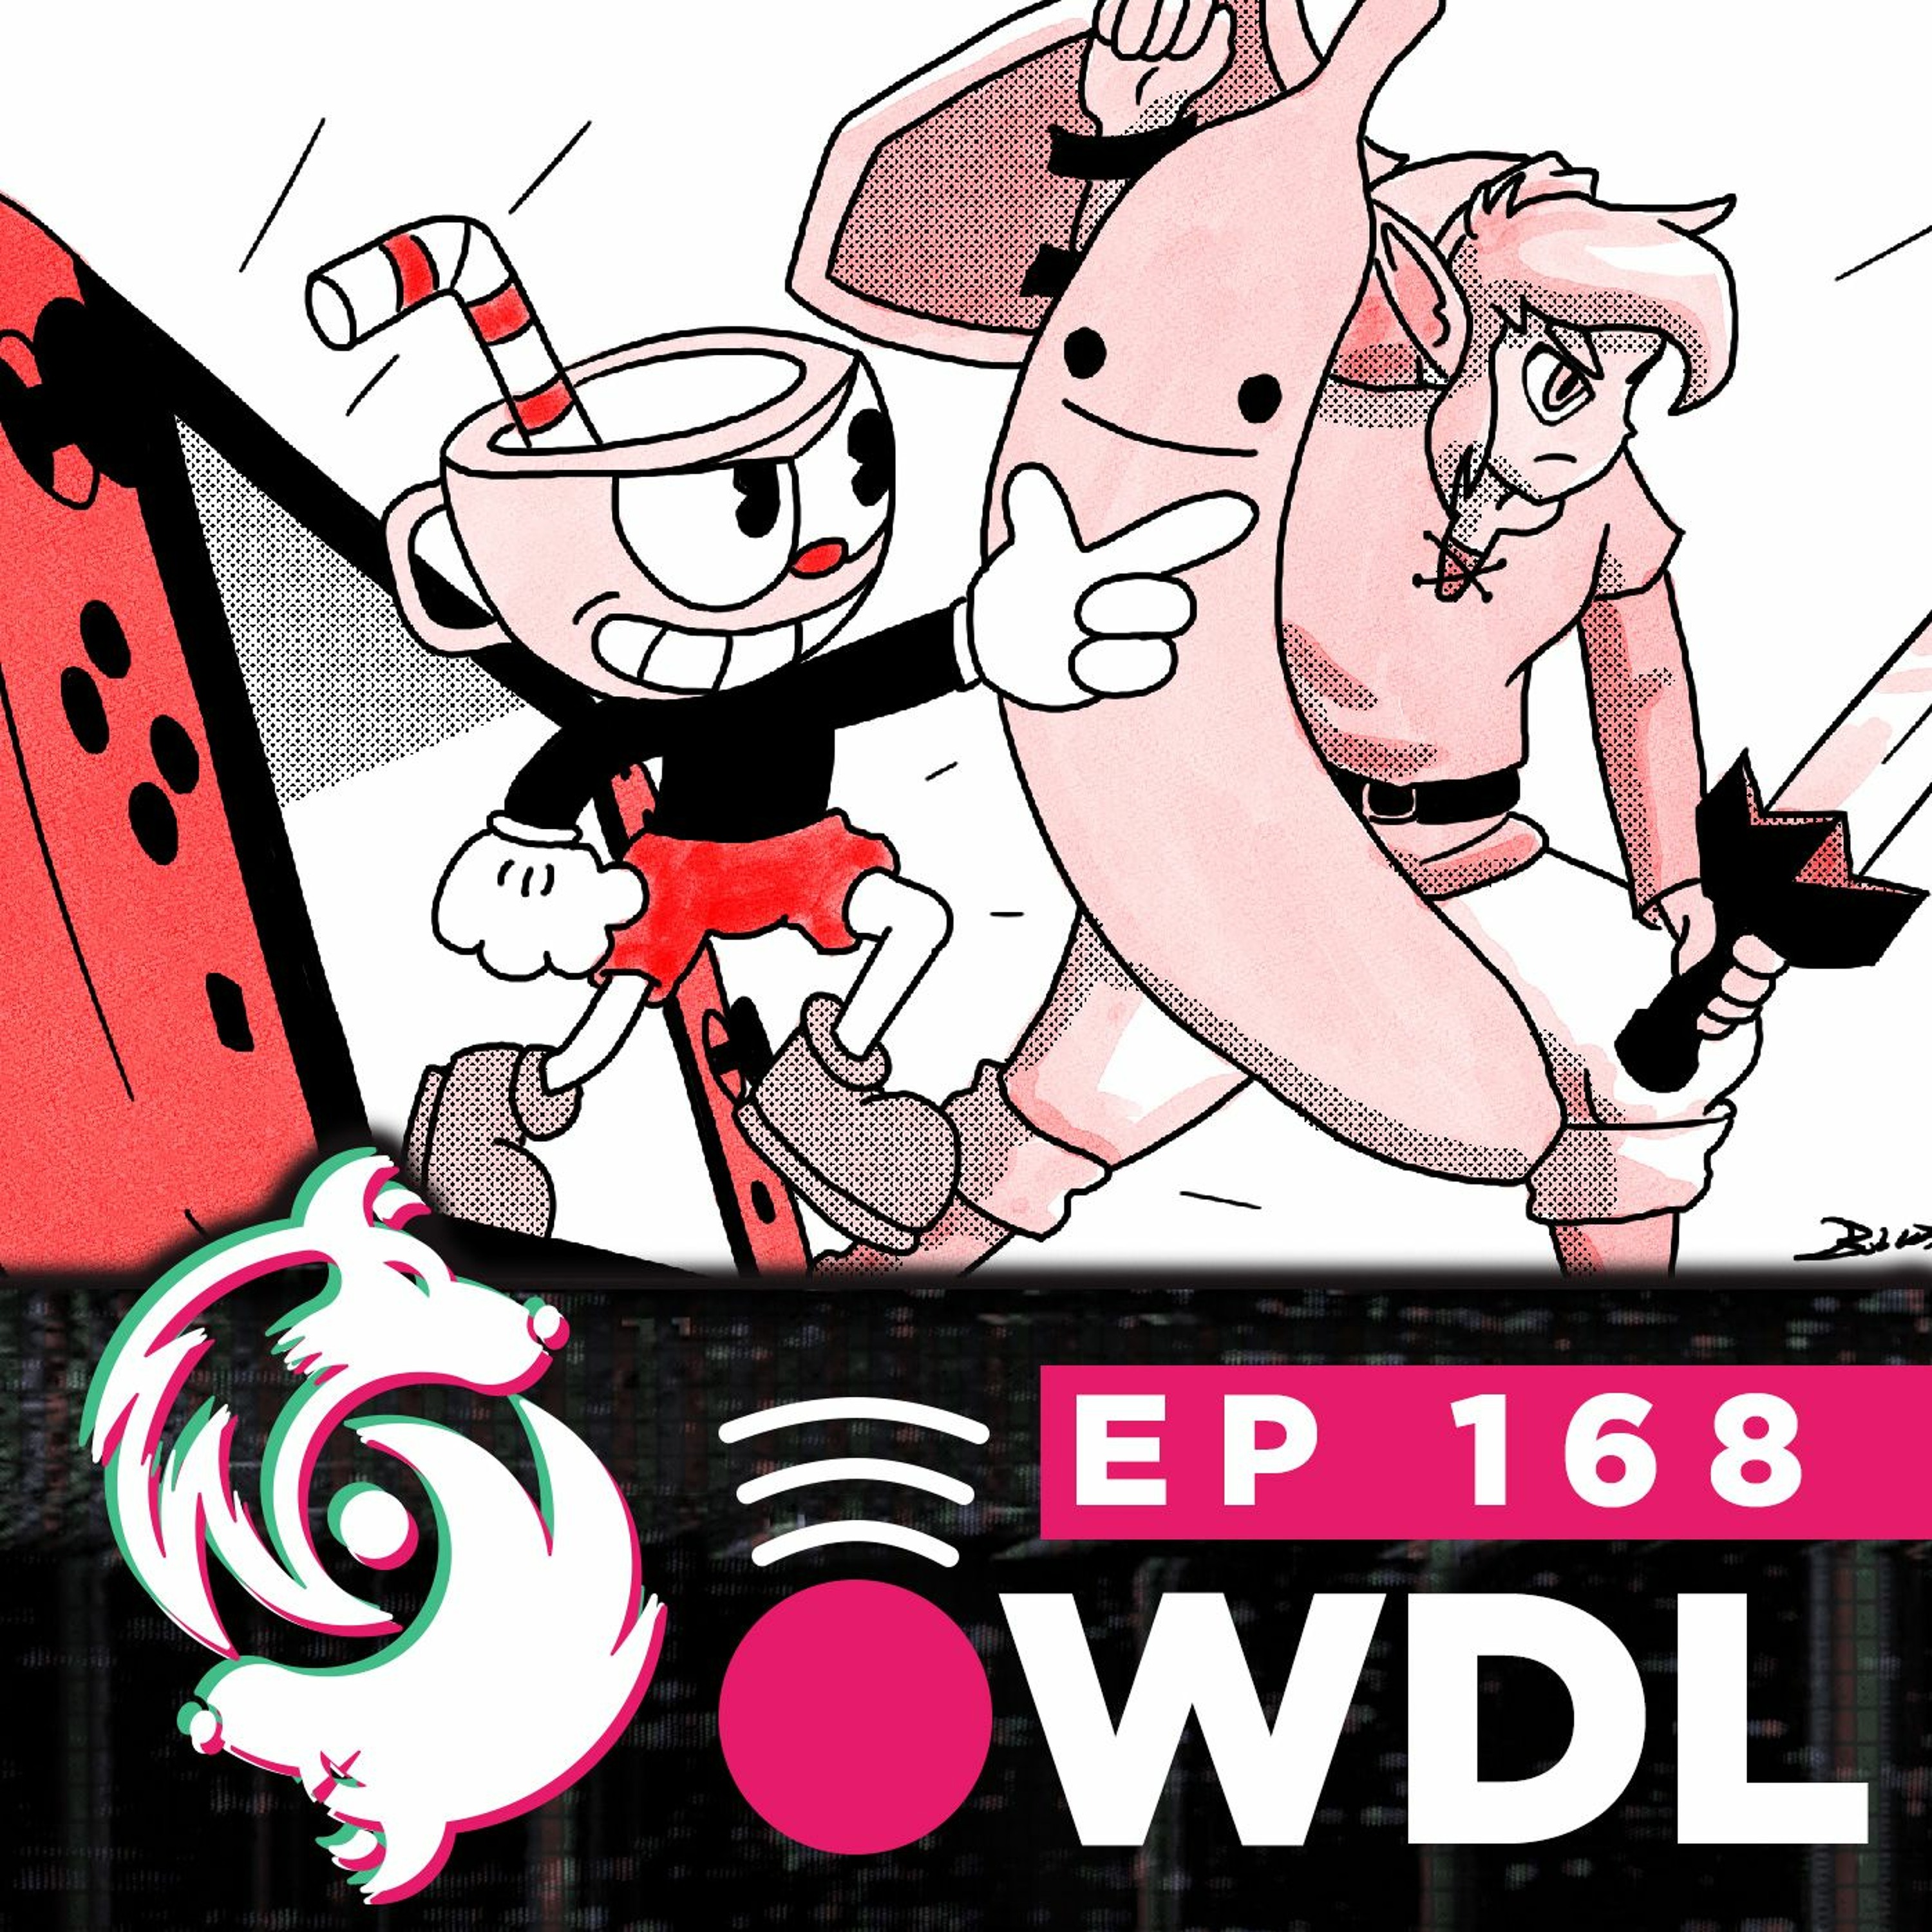 All of the new Indie Games just announced for the Switch - WDL Ep 168